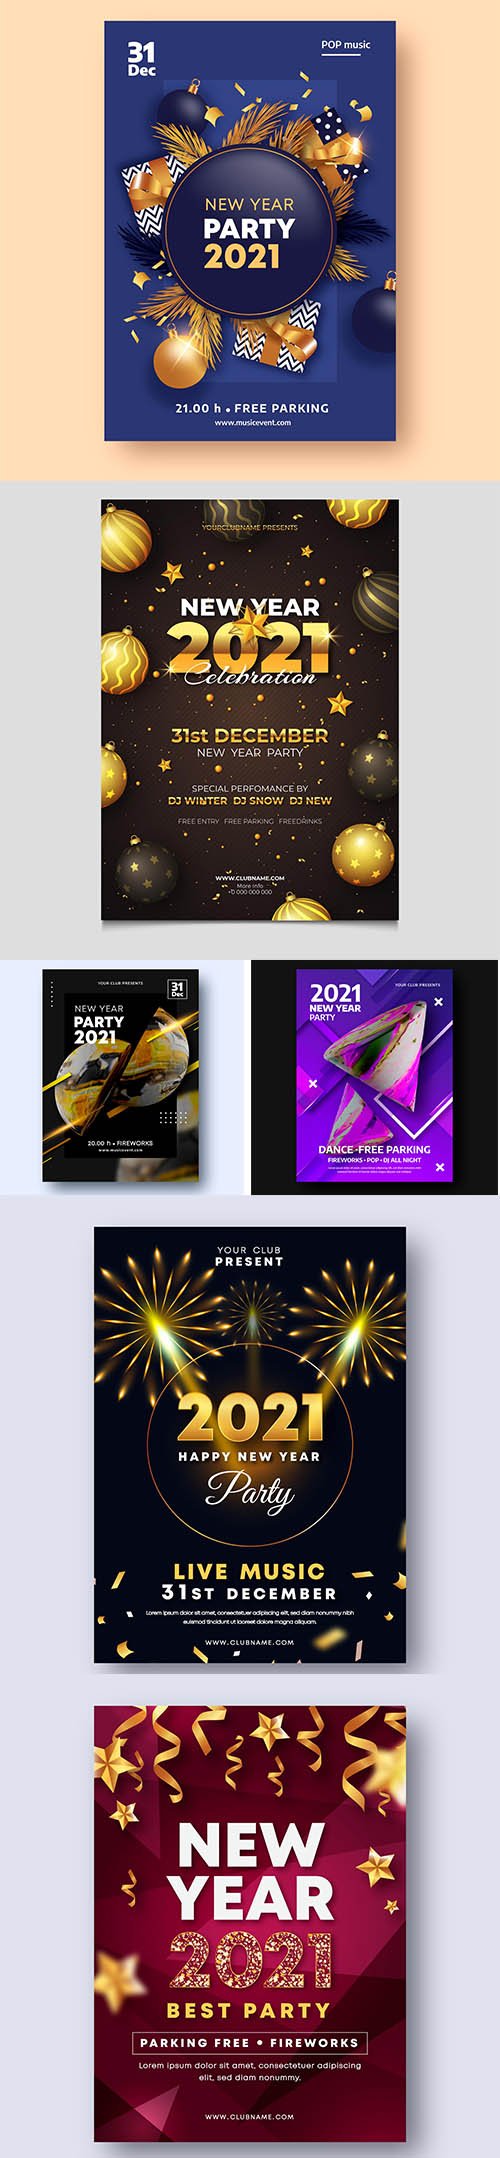 Realistic new year 2021 party flyer template